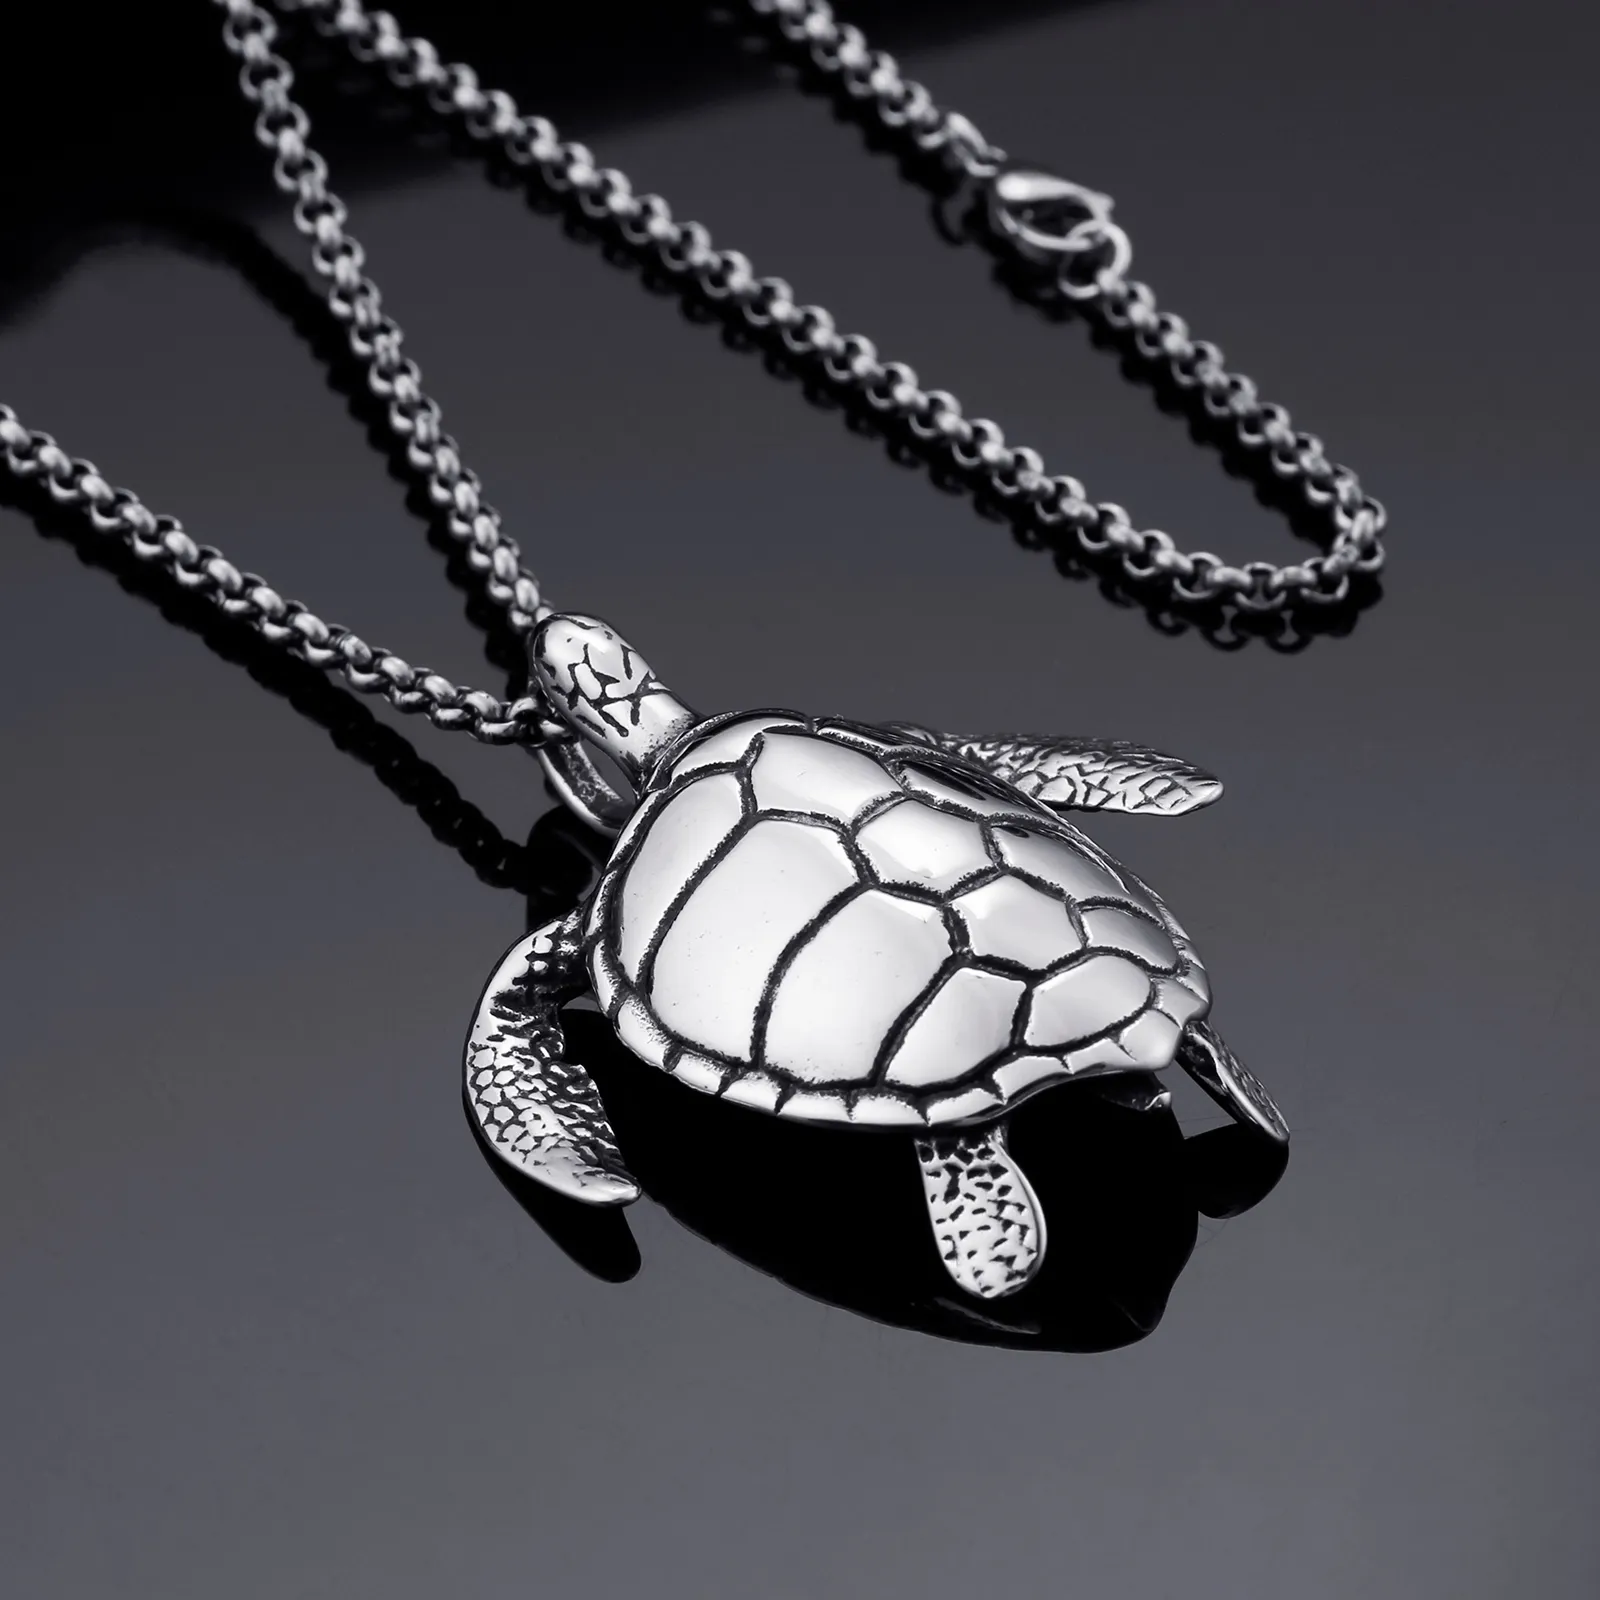 New casting Stainless Steel Baby Turtle Pendant Necklace Cool Gifts For Men Boys Baby Lovely Gift3194